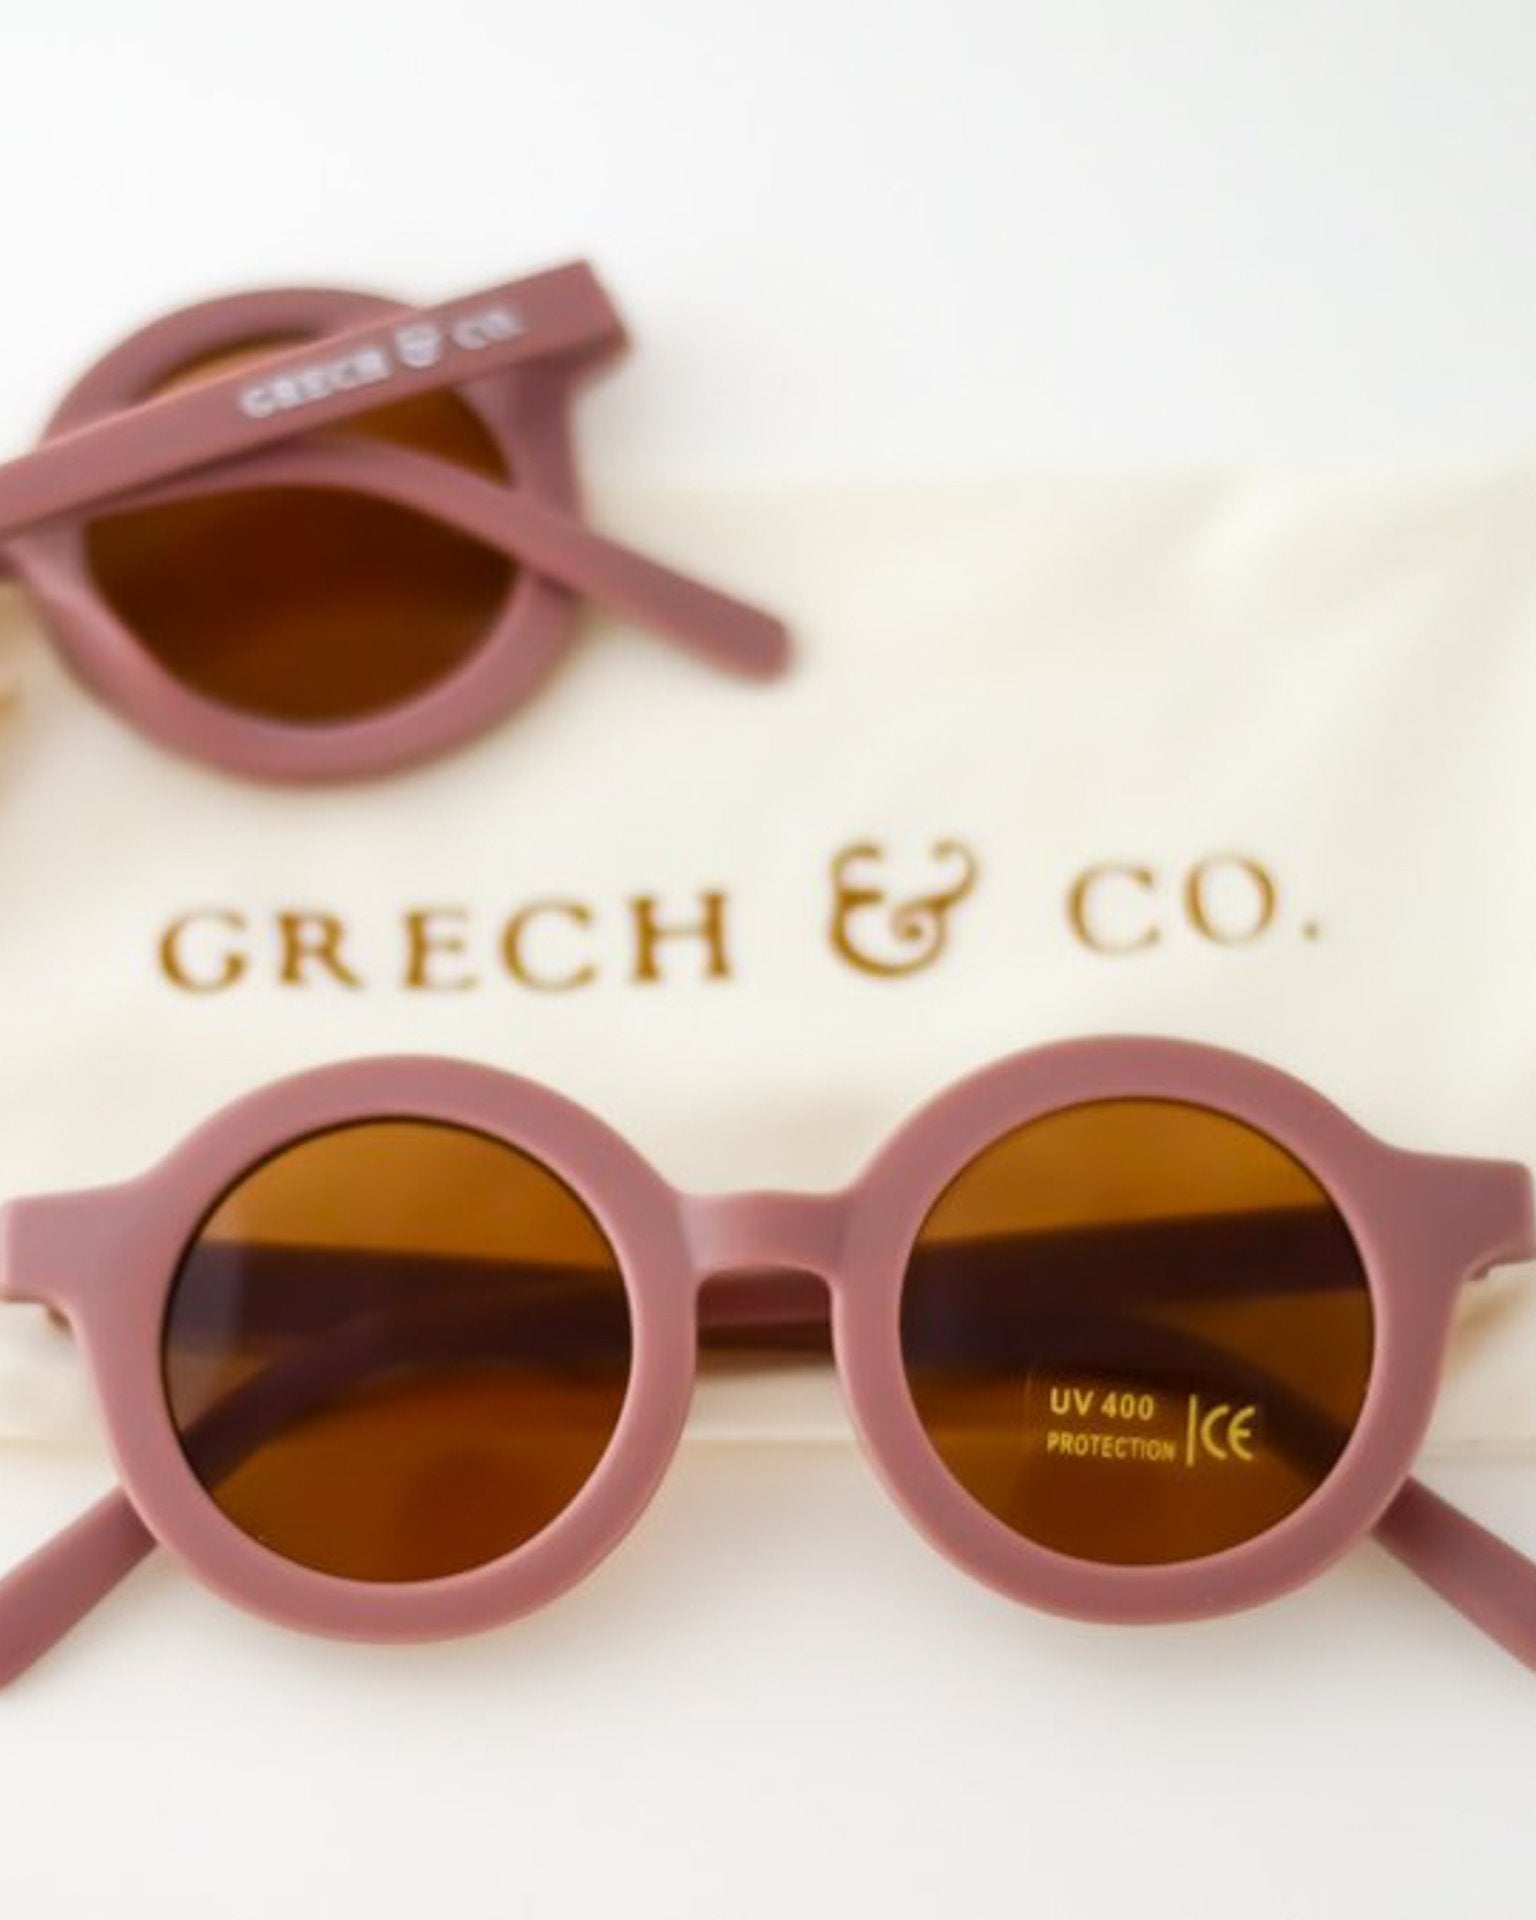 Little grech + co accessories sustainable sunglasses in burlwood